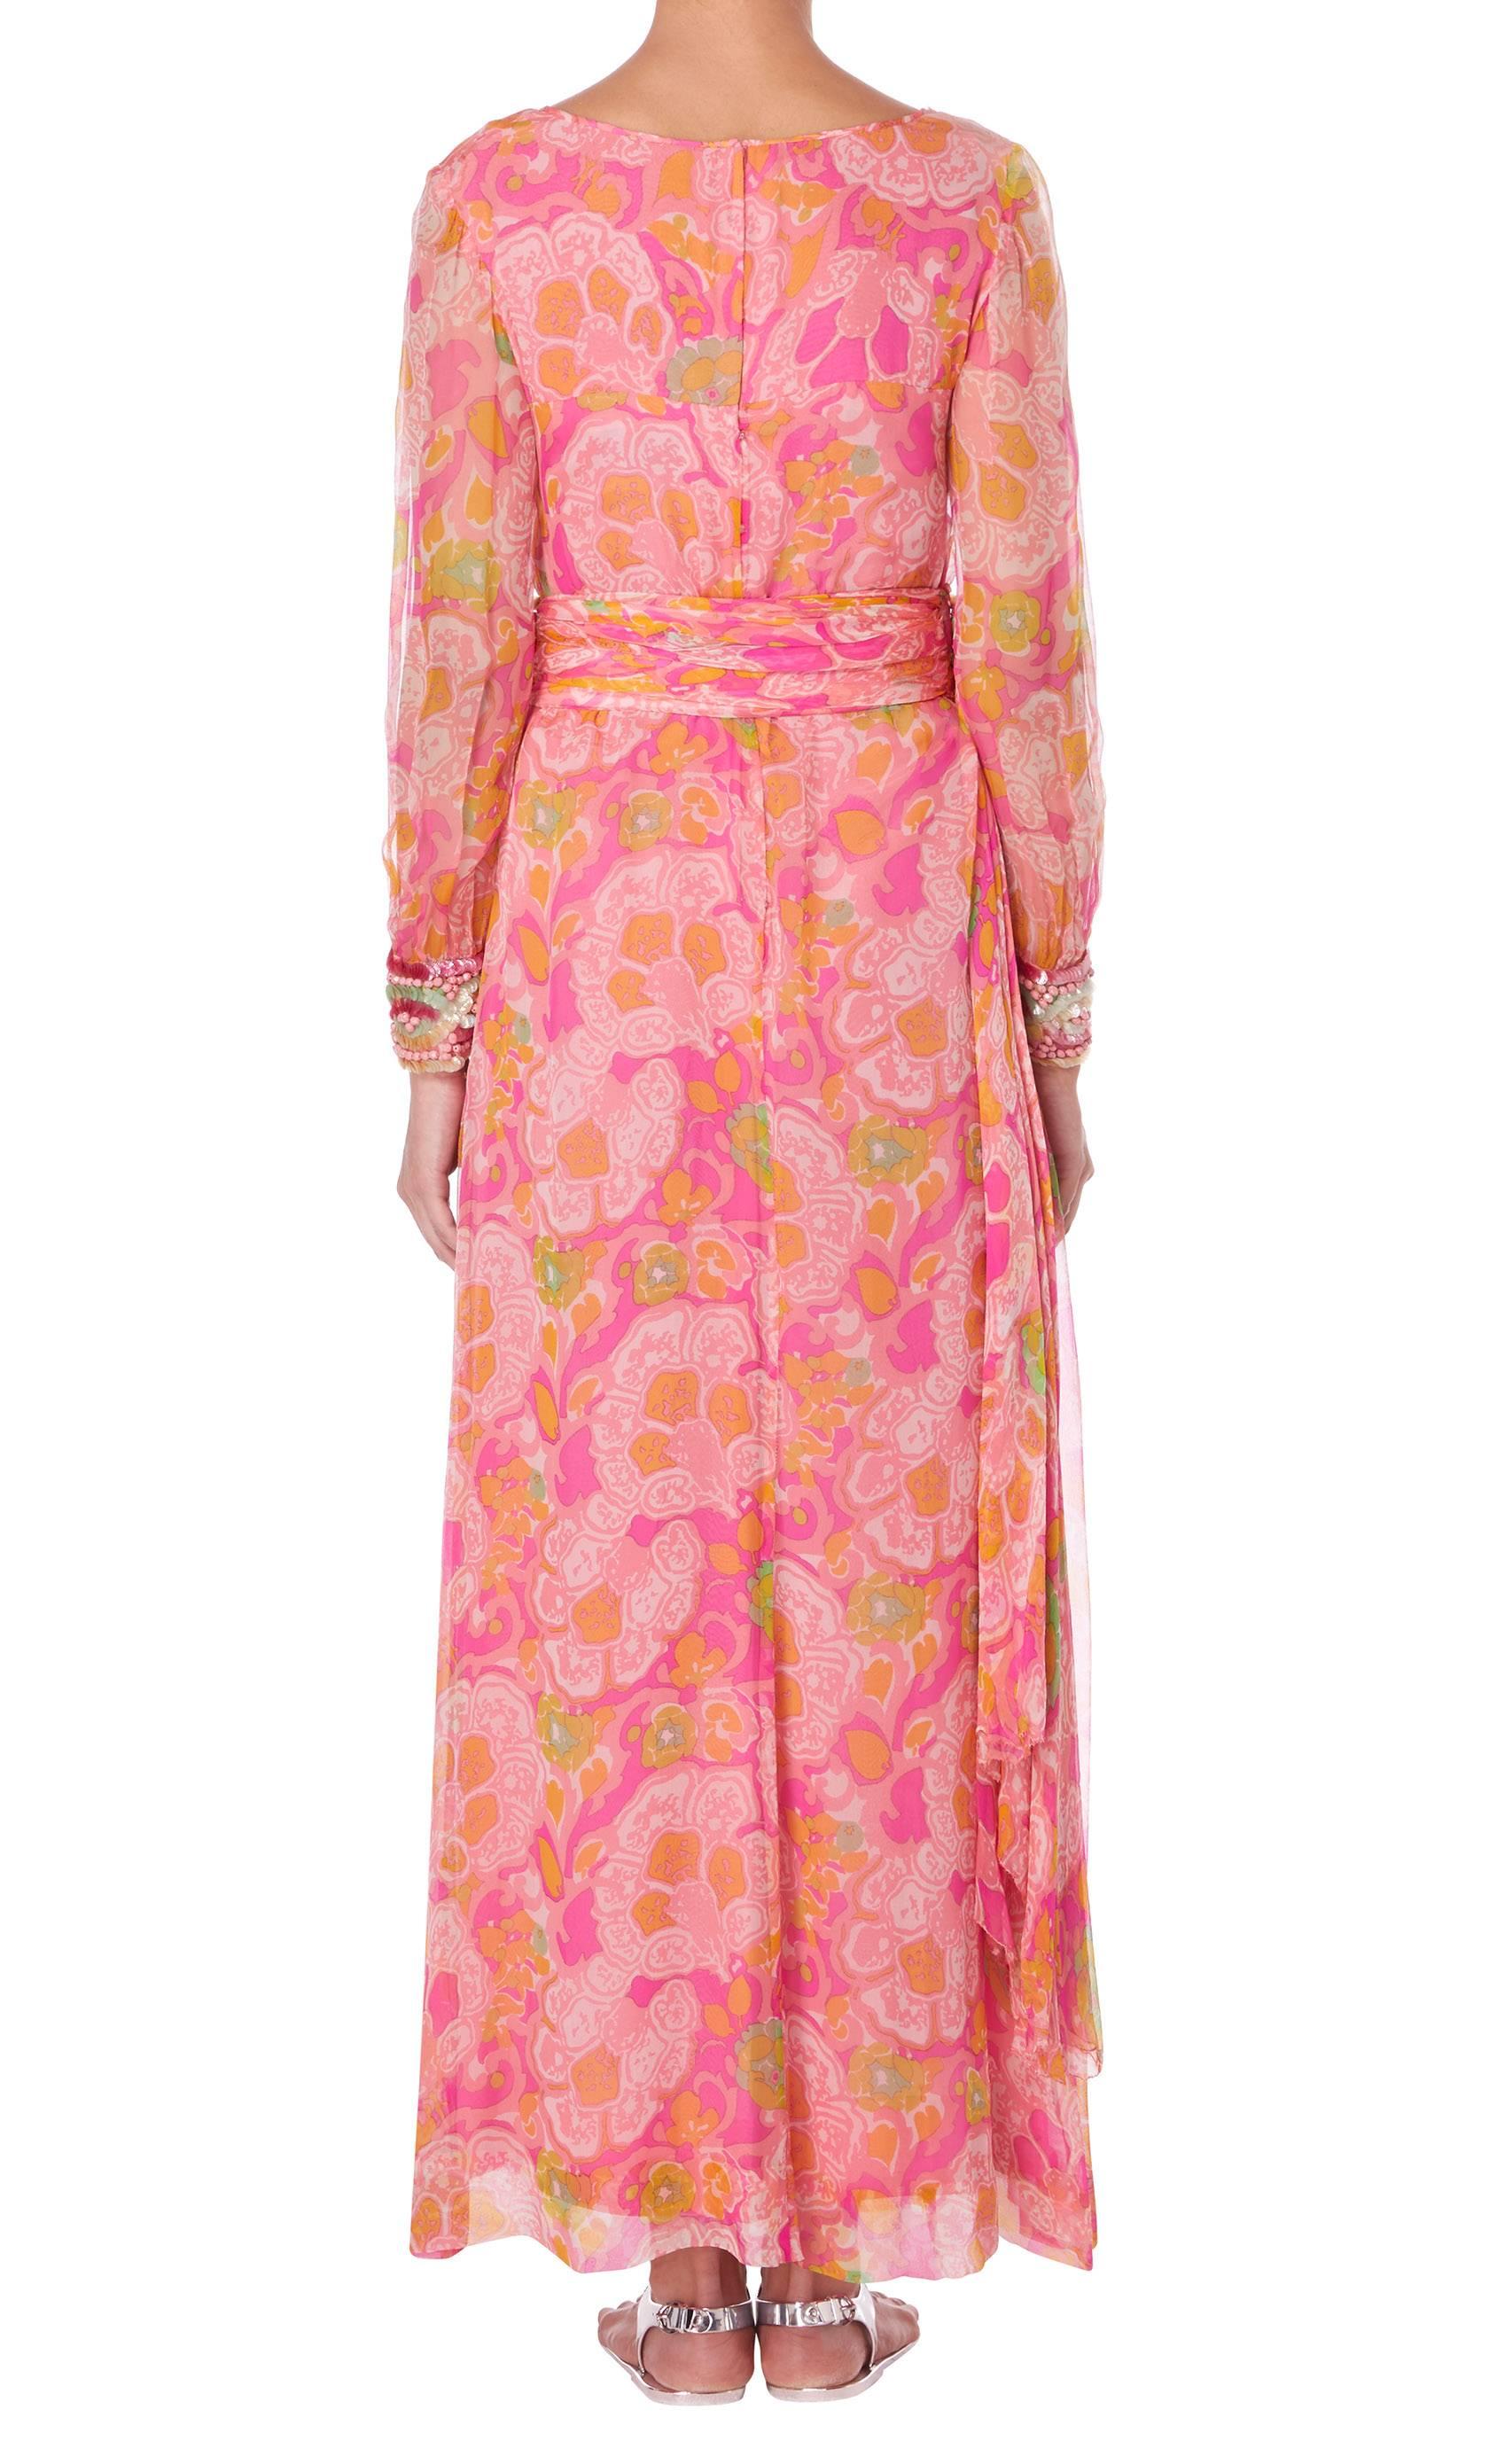 Pink Hardy Amies Couture pink silk chiffon dress, circa 1969 For Sale